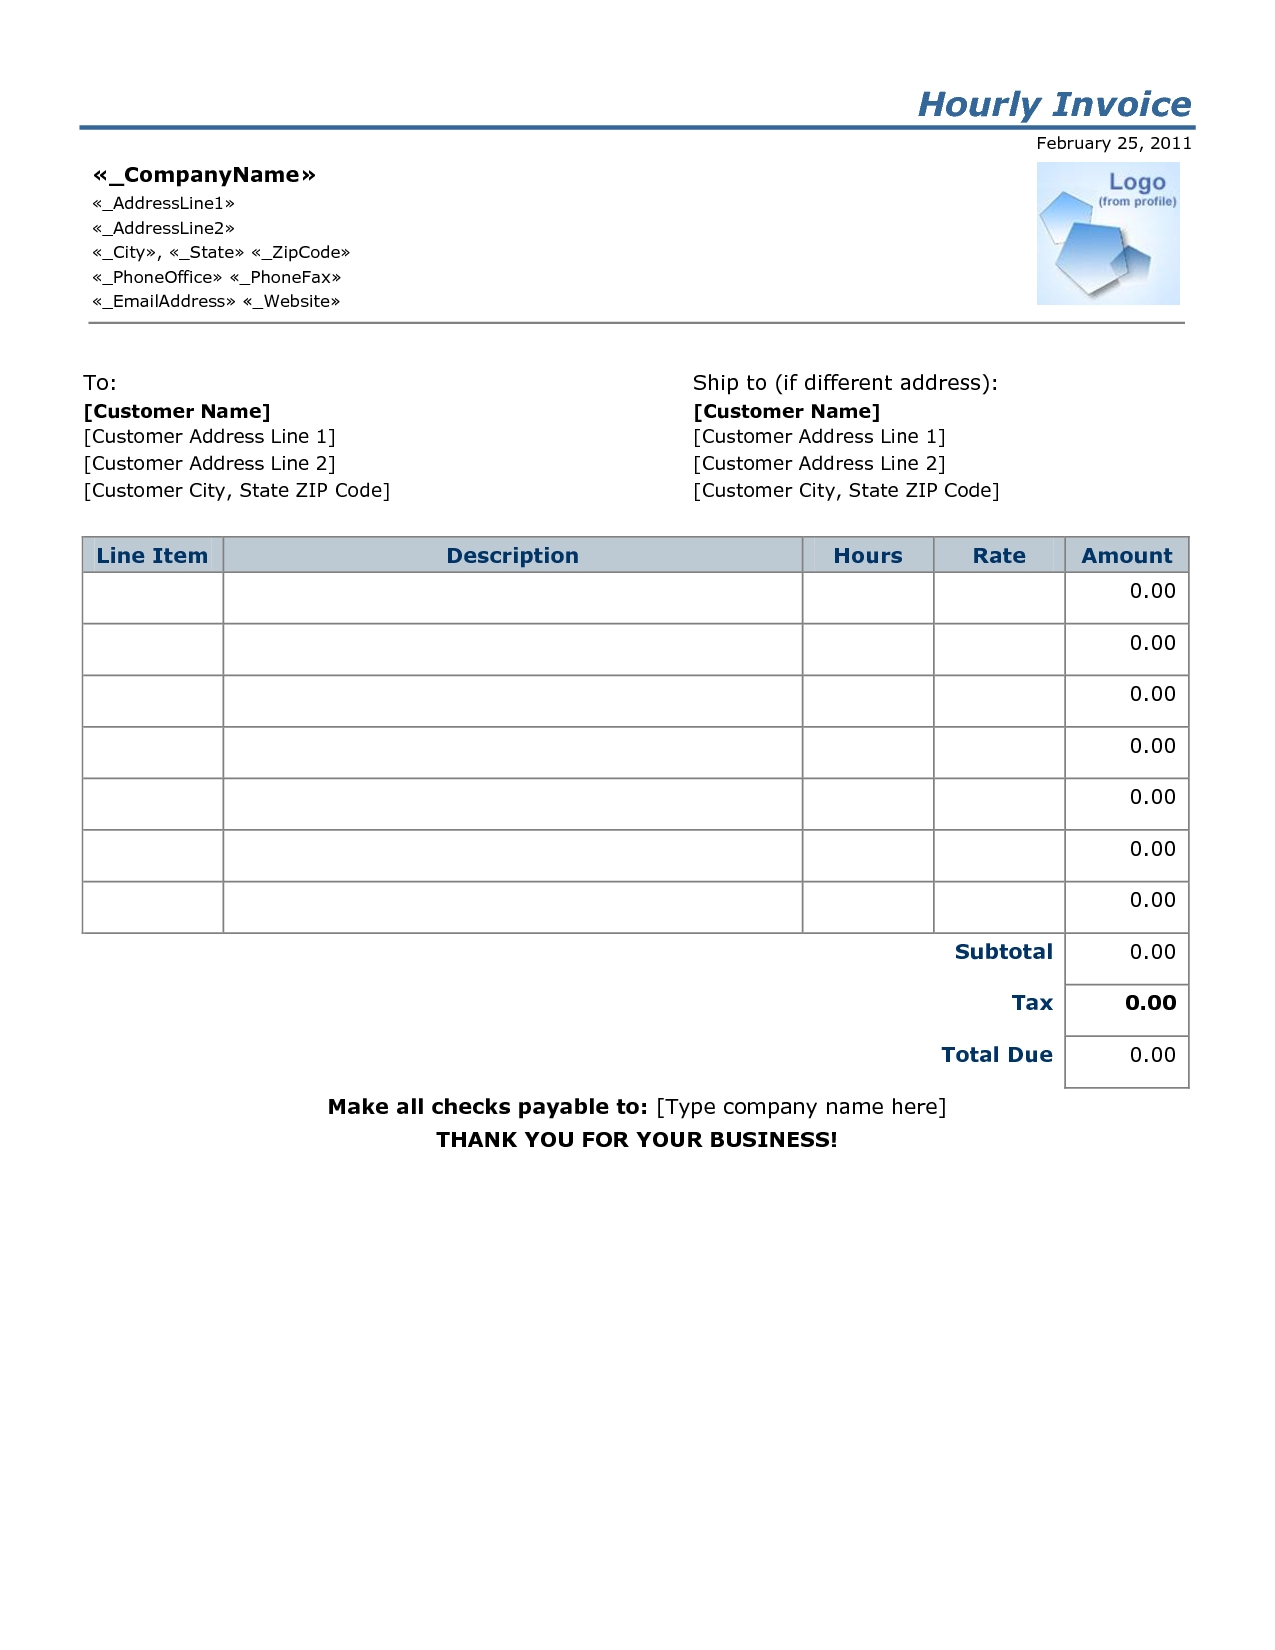 11 best images of hourly invoice template hourly invoice hourly rate invoice template